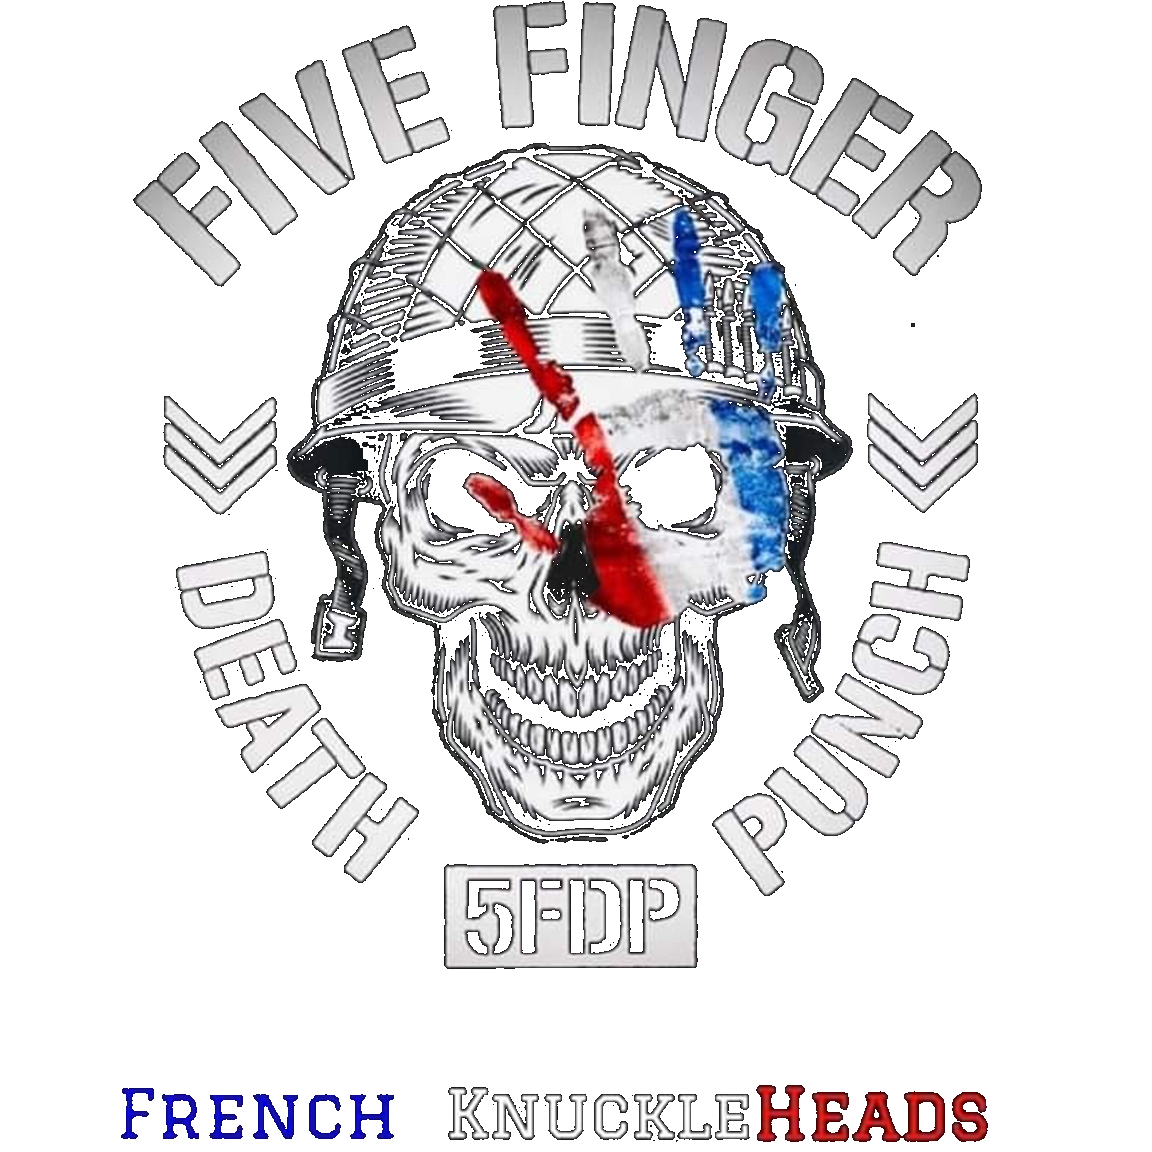 French Knuckleheads